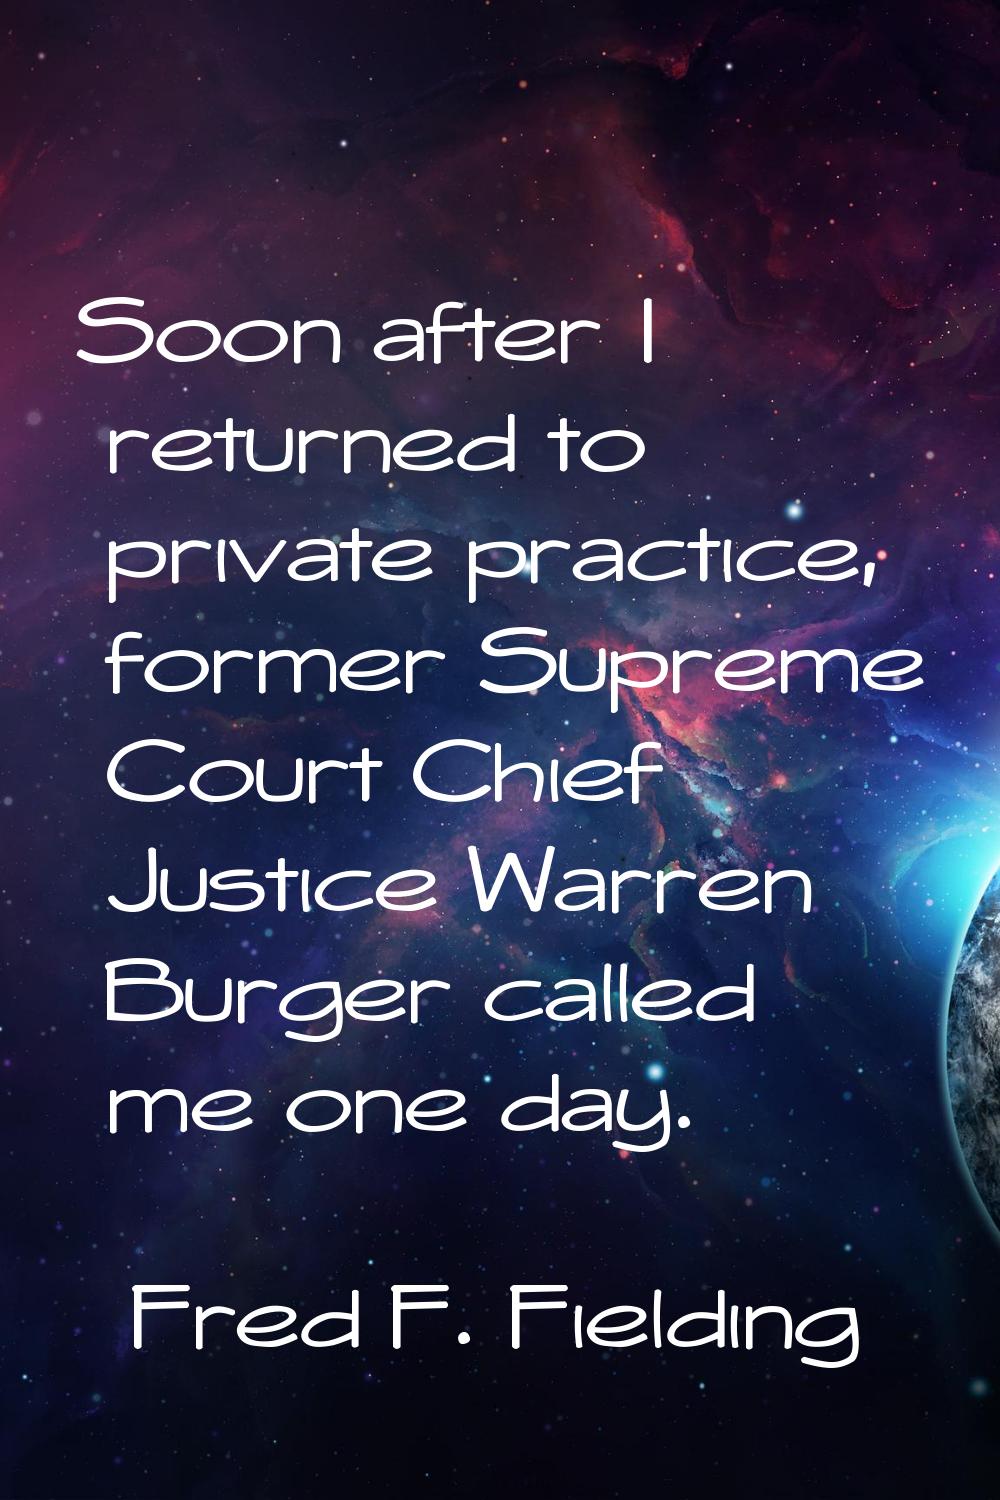 Soon after I returned to private practice, former Supreme Court Chief Justice Warren Burger called 